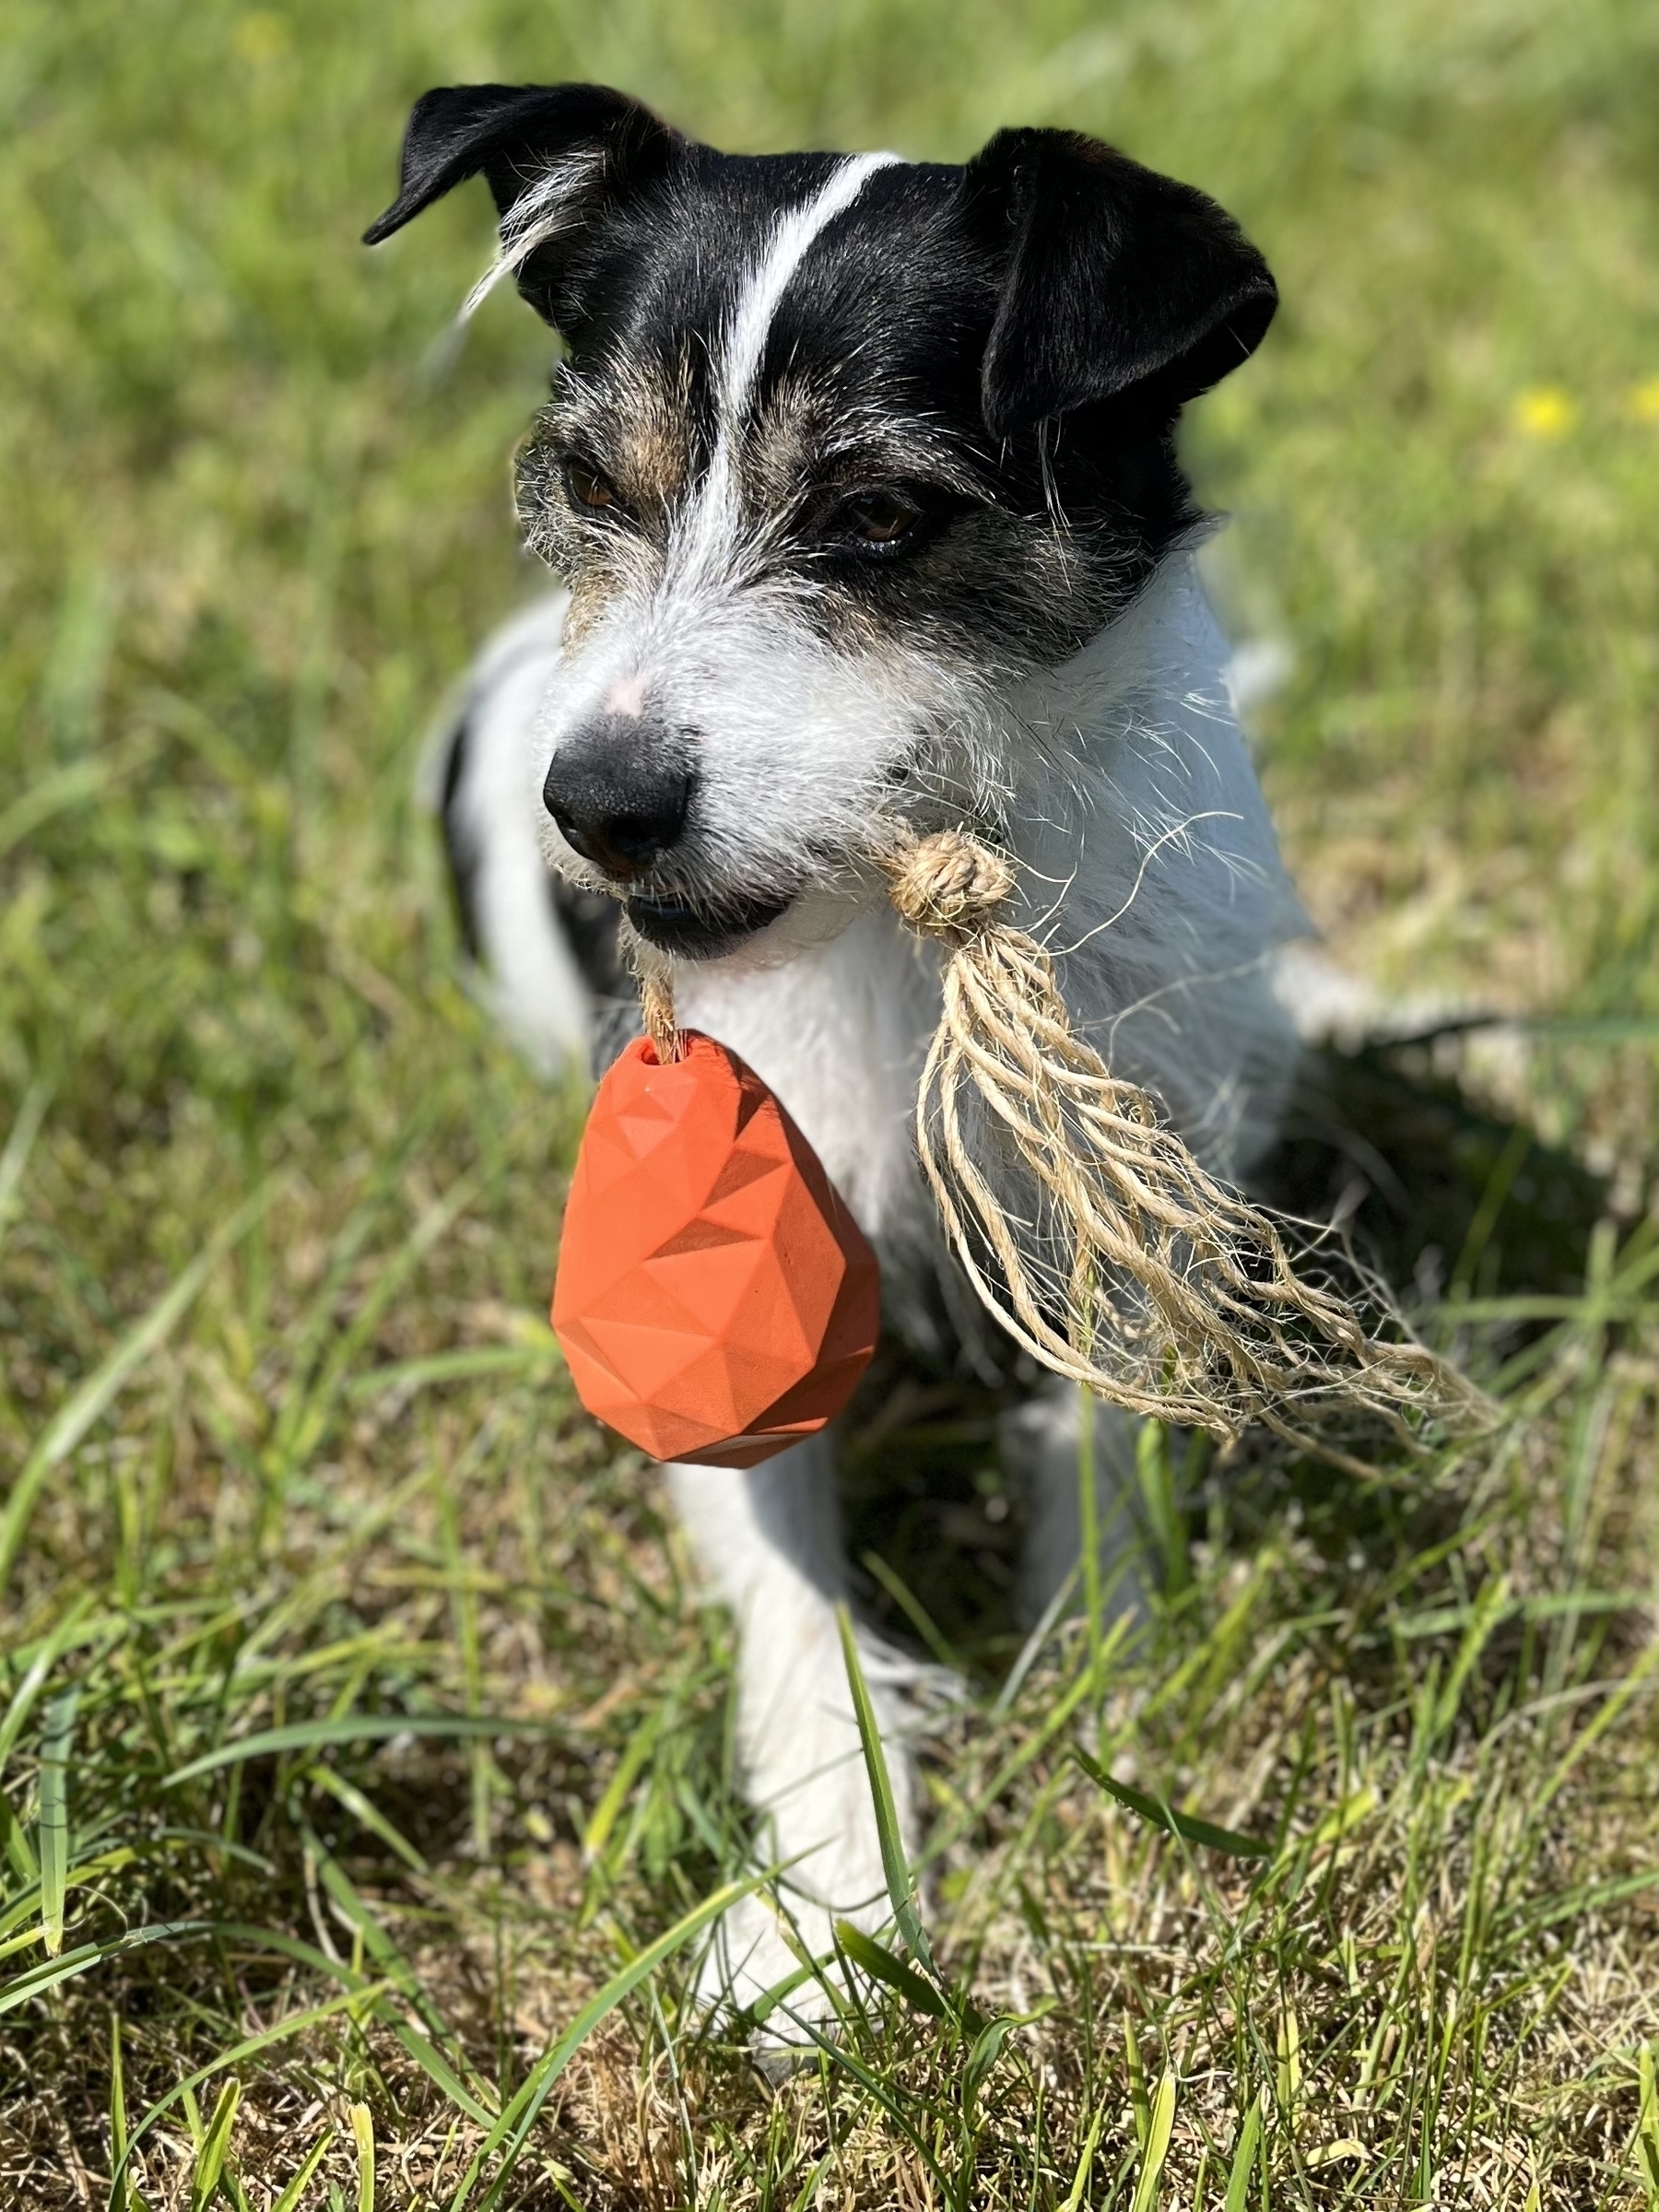 Leela the terrier sits on the grass, with a fraying rope and attached dog toy in her mouth